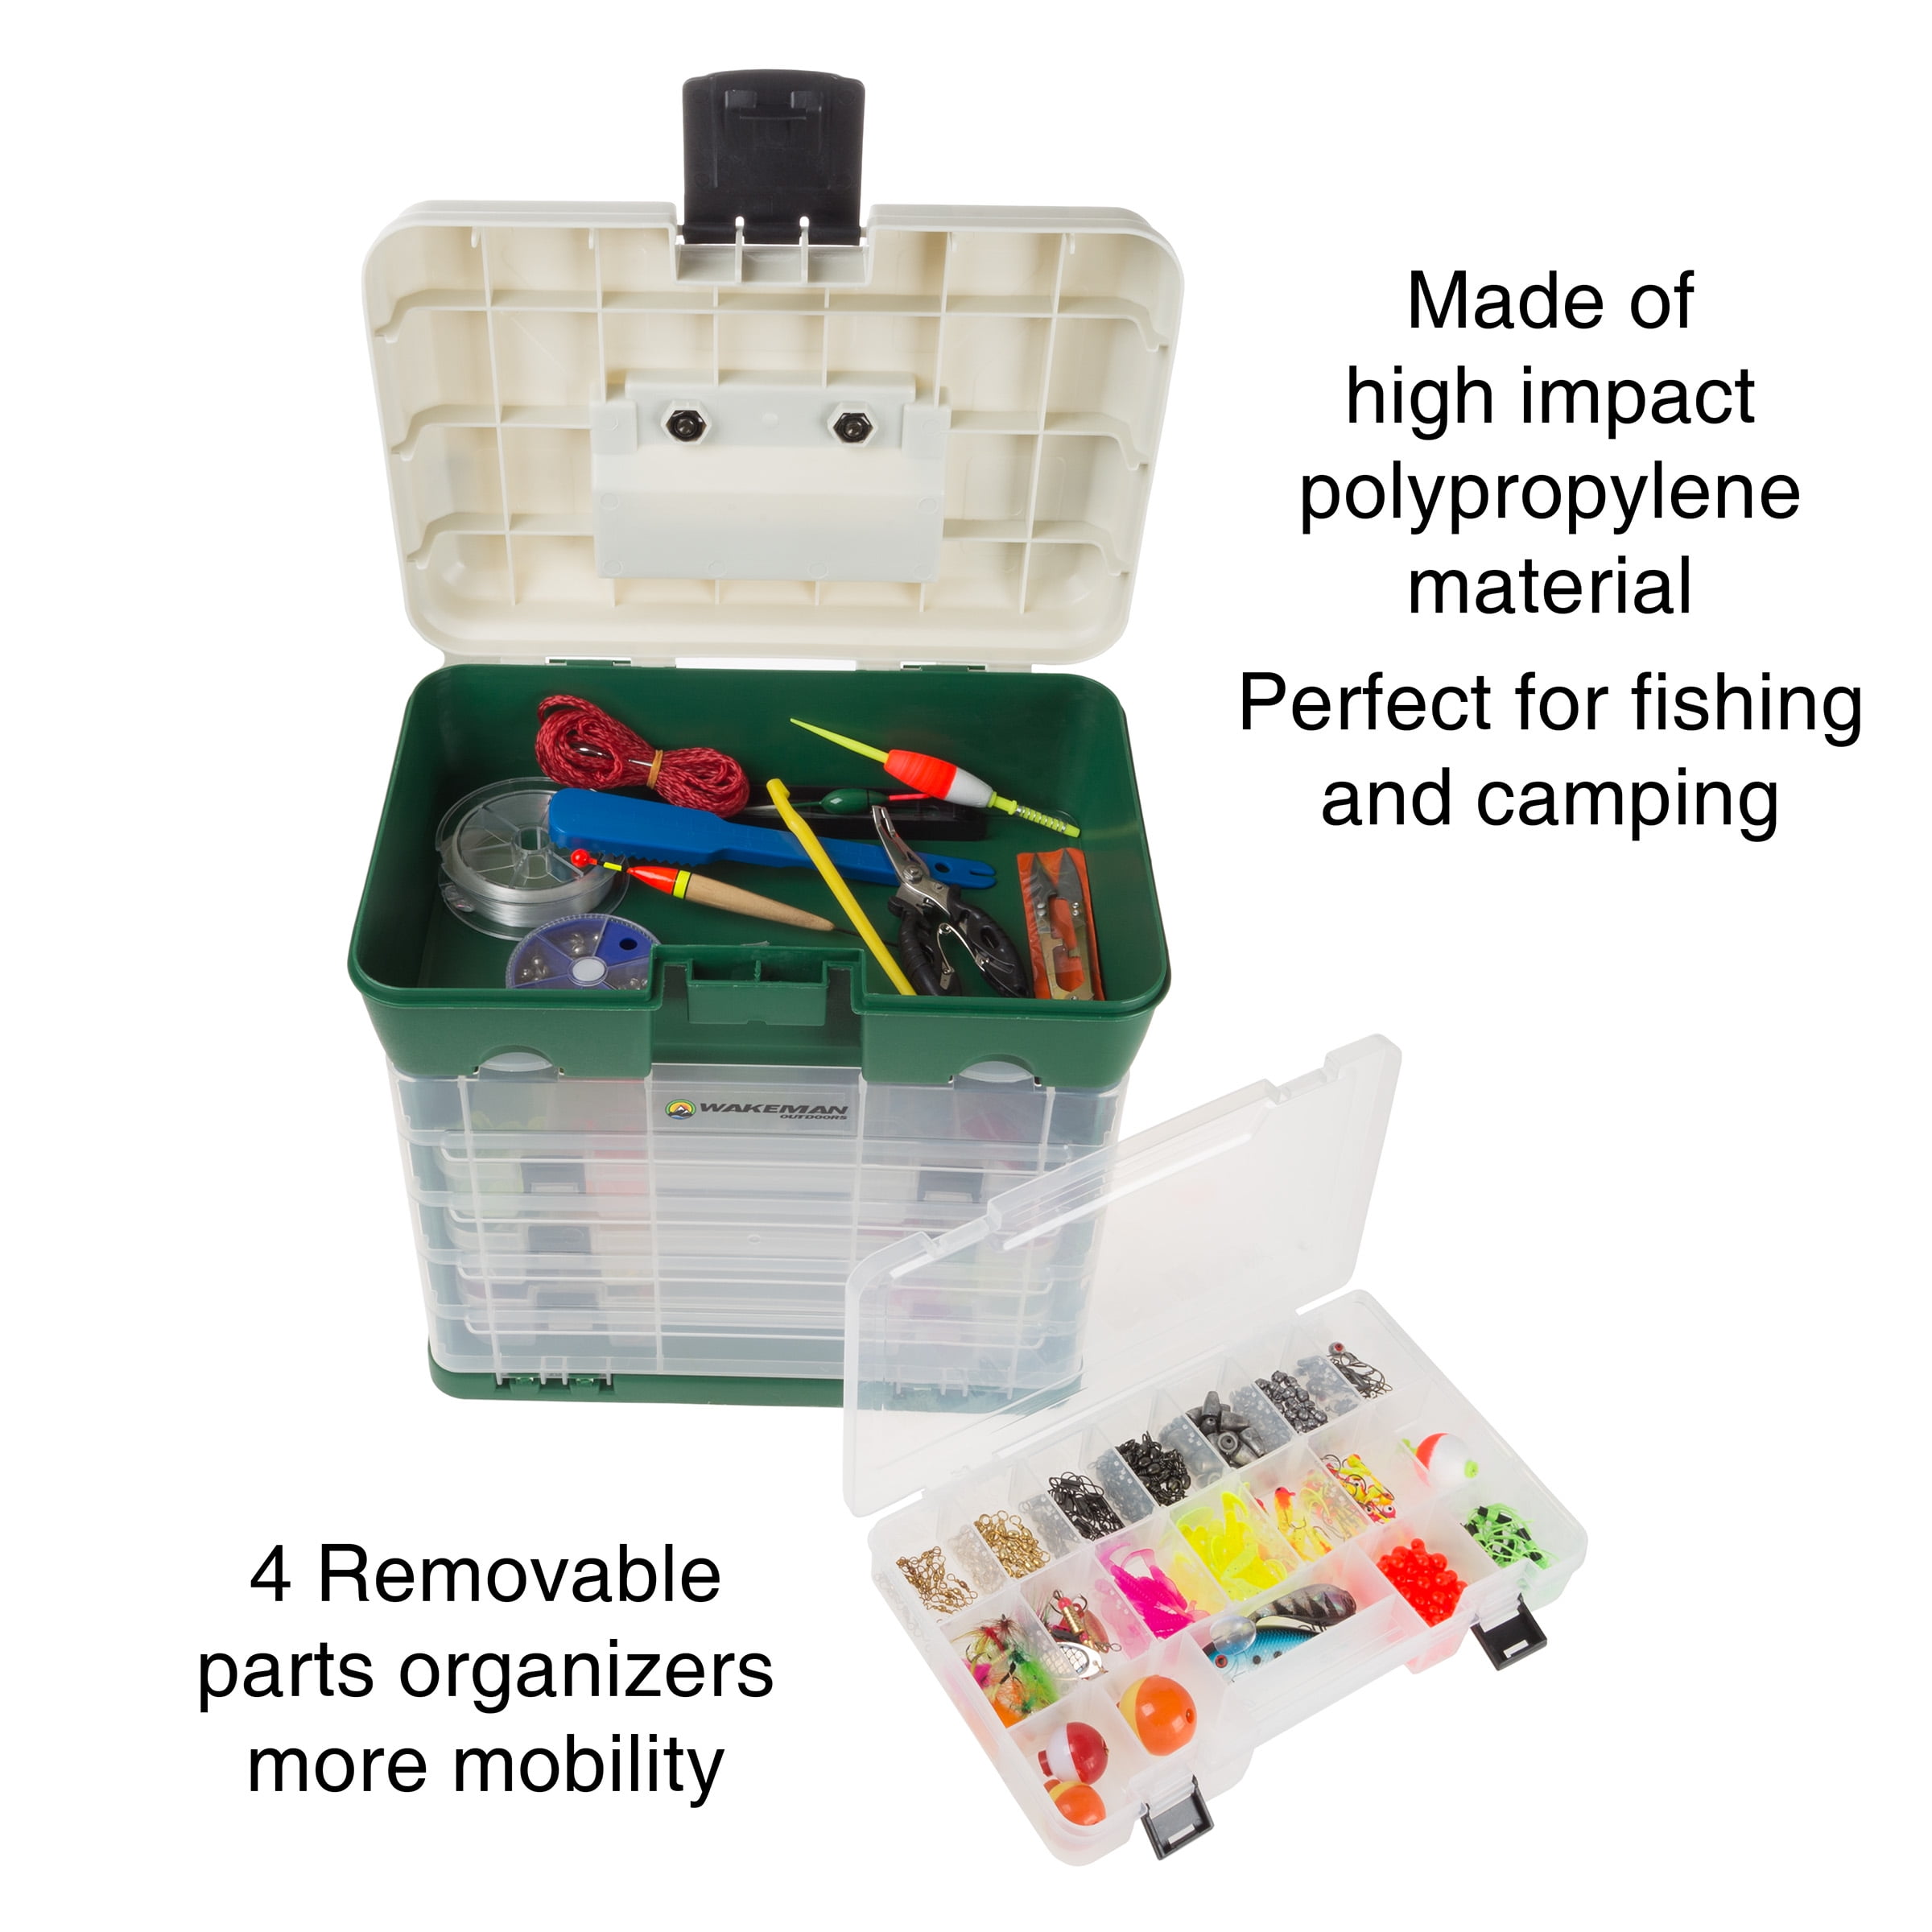 Tackle Box Organizer - Durable Plastic Storage Tacklebox and Craft Supplies  by Wakeman.